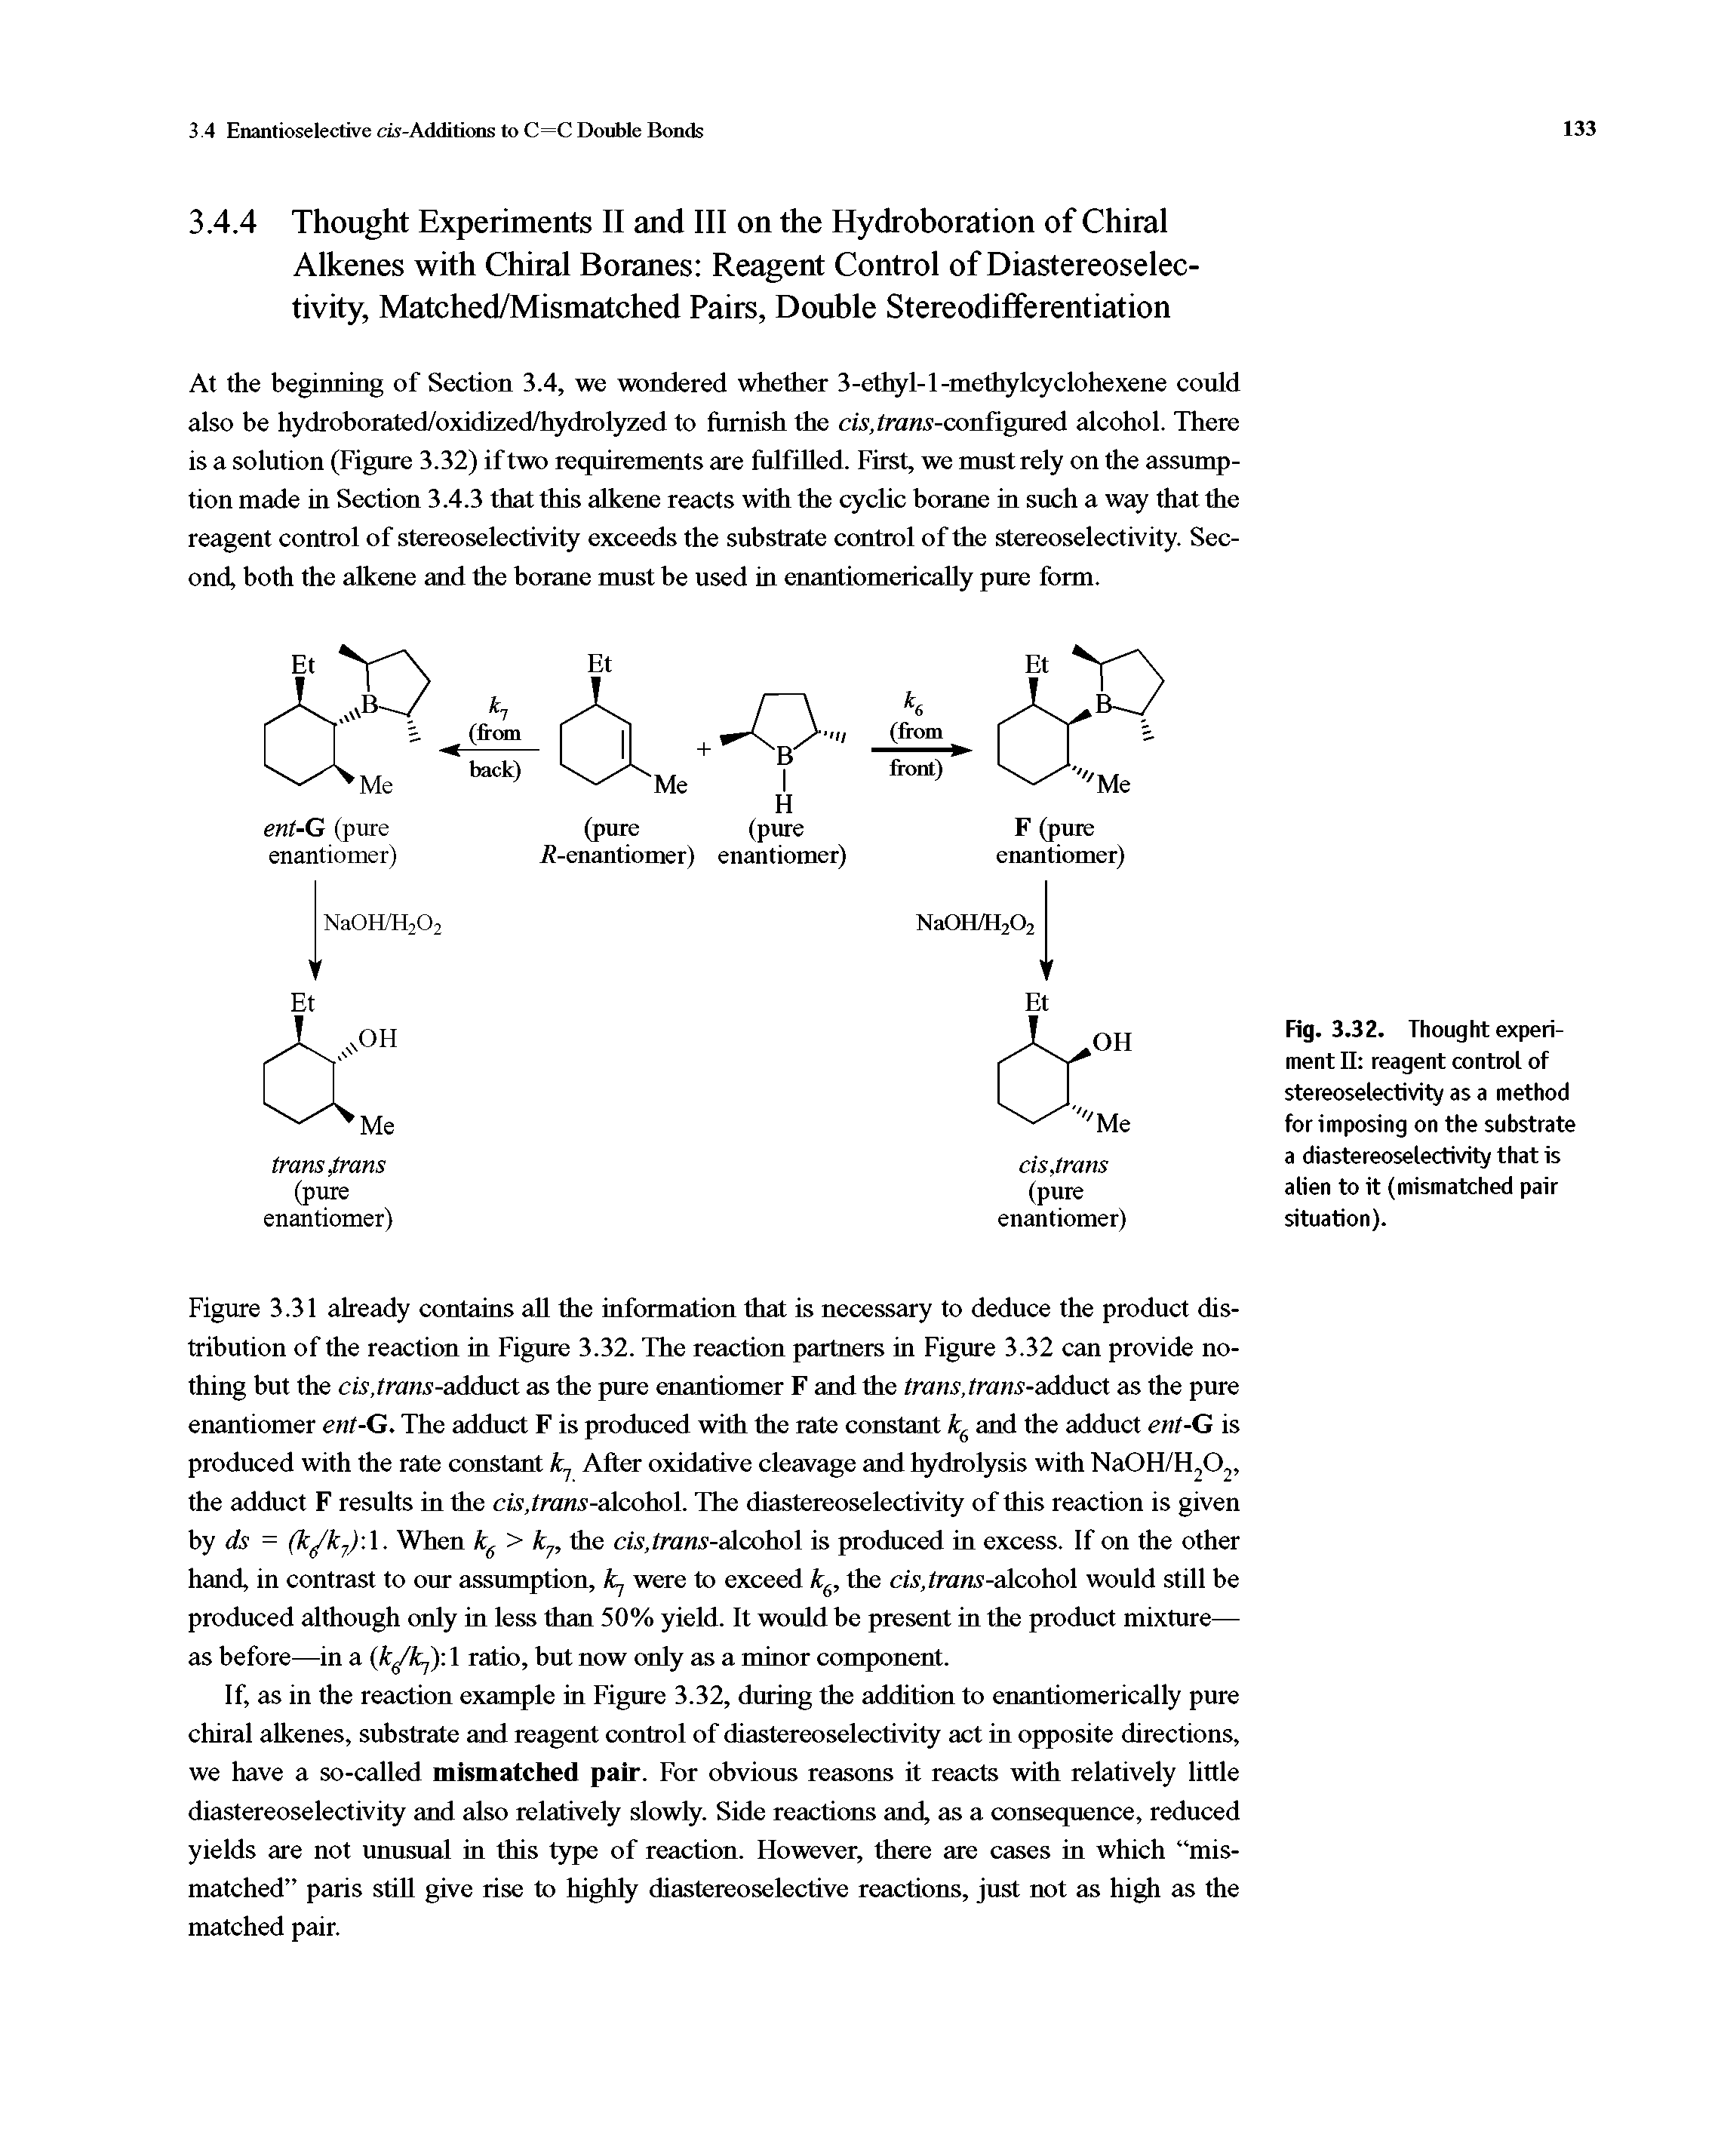 Fig. 3. 32. Thought experiment II reagent control of stereoselectivity as a method for imposing on the substrate a diastereoselectivity that is alien to it (mismatched pair situation).